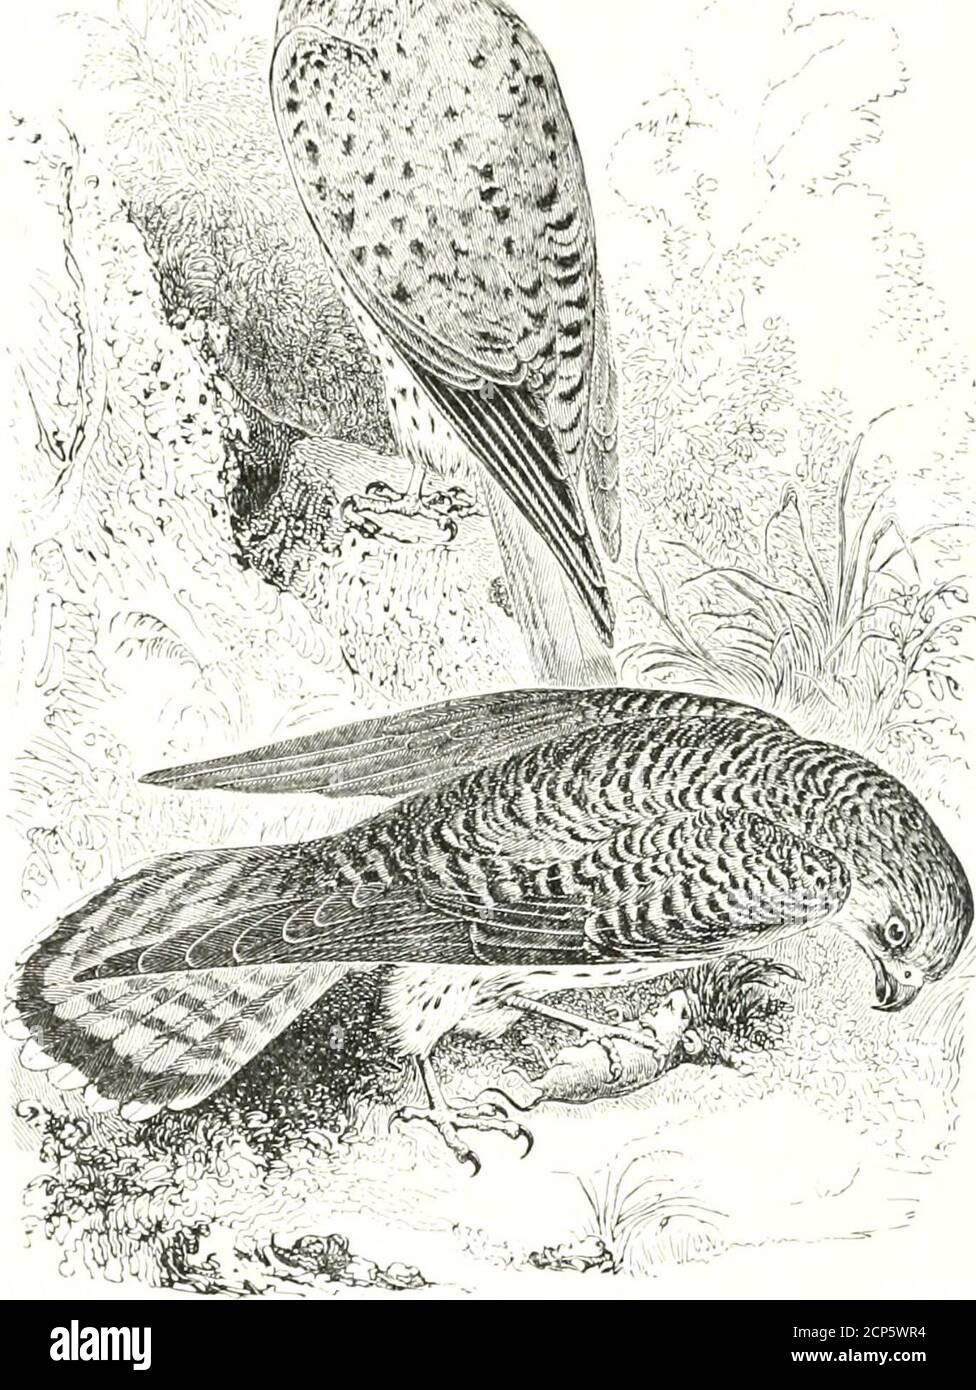 . A history of British birds . Falco tinnunculus, Linnaeus *.THE KESTREL, OR WINDHOVER. Falco tinnunculus. The Kestrel is the must common species of the BritishFalconidce, and from its peculiar habits, which place it veryoften in view, it is also, as might be expected, the bestknown. It is handsome in shape, attractive in colour, andgraceful in its motions in the air; though from its mode of * Syst. Nat. Ed. 12, i. &gt;. 127 (1766). KESTEEL. 79 searching for its food, and the shortness of its wings com-pared with the other small species already figured, it departsfrom the characters of the tr Stock Photo